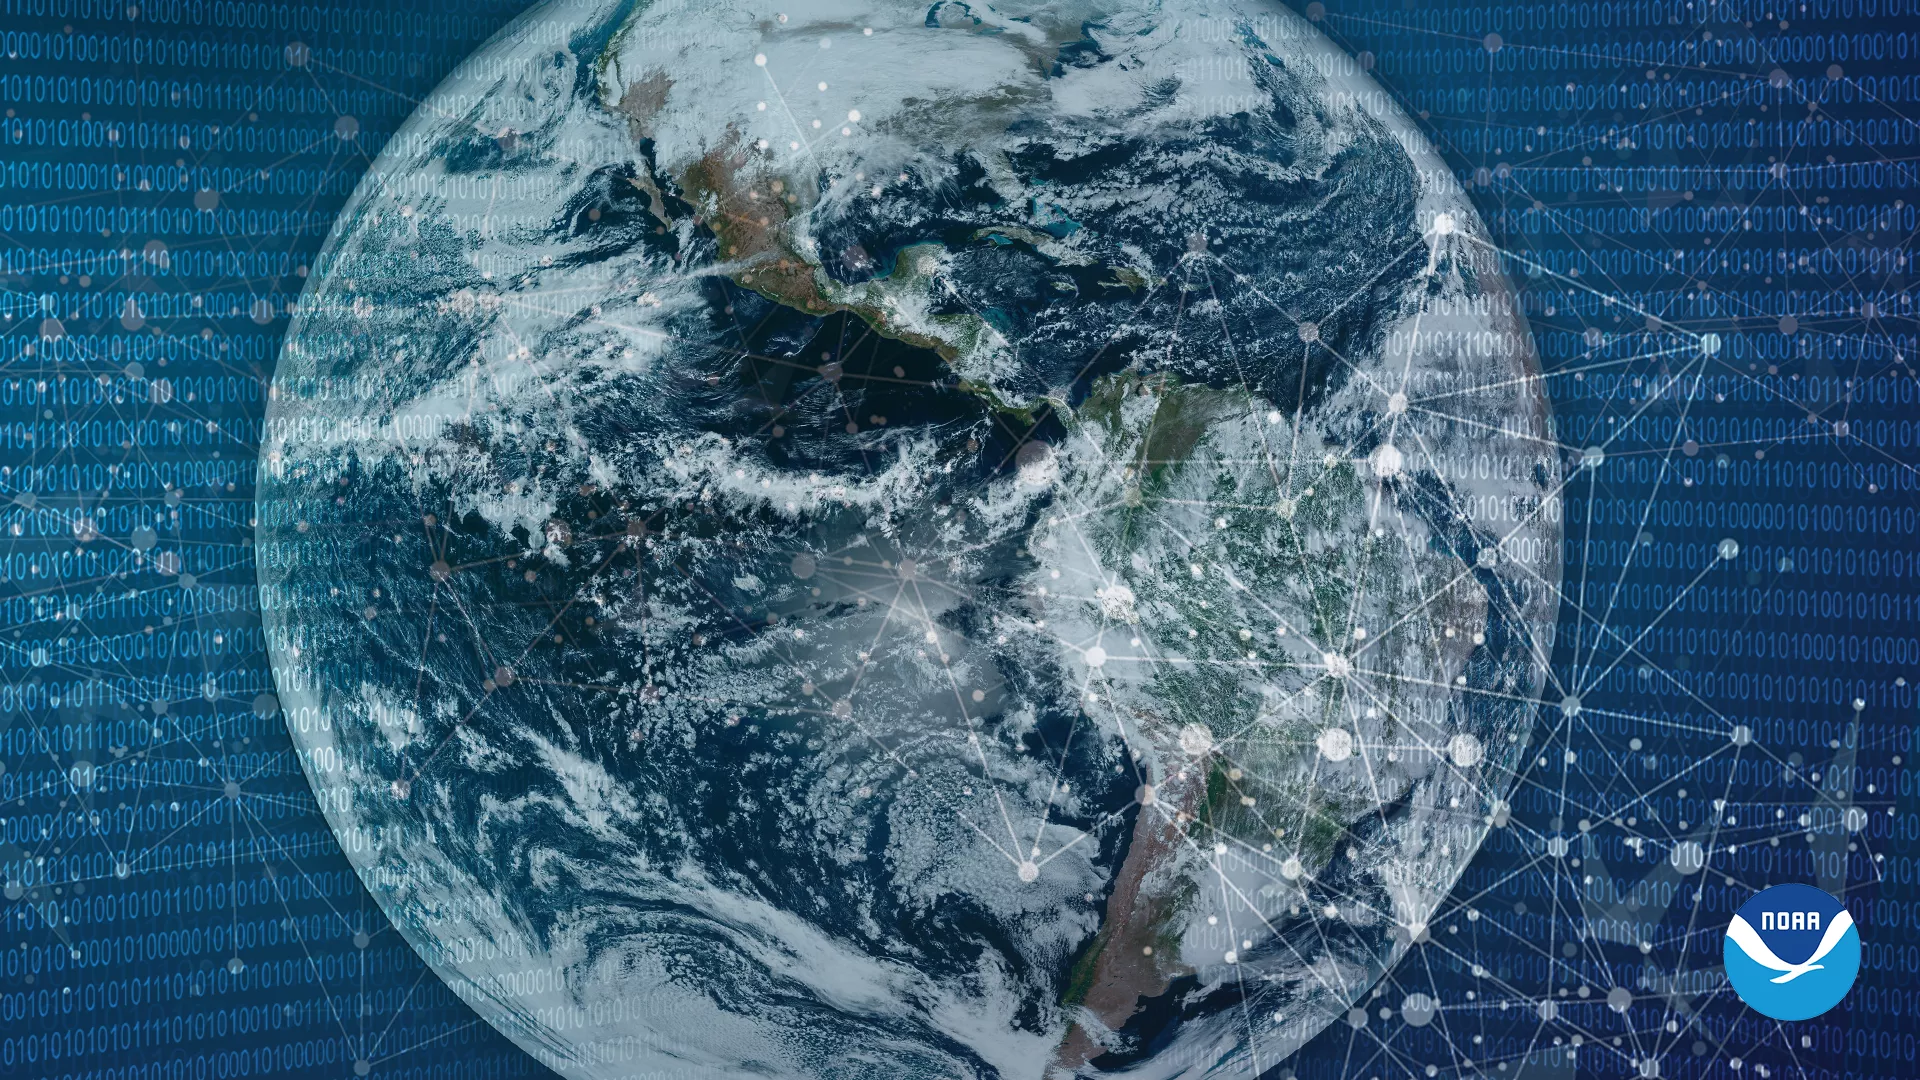 Image of the earth and space with binary code overlayed displaying data; NOAA Logo